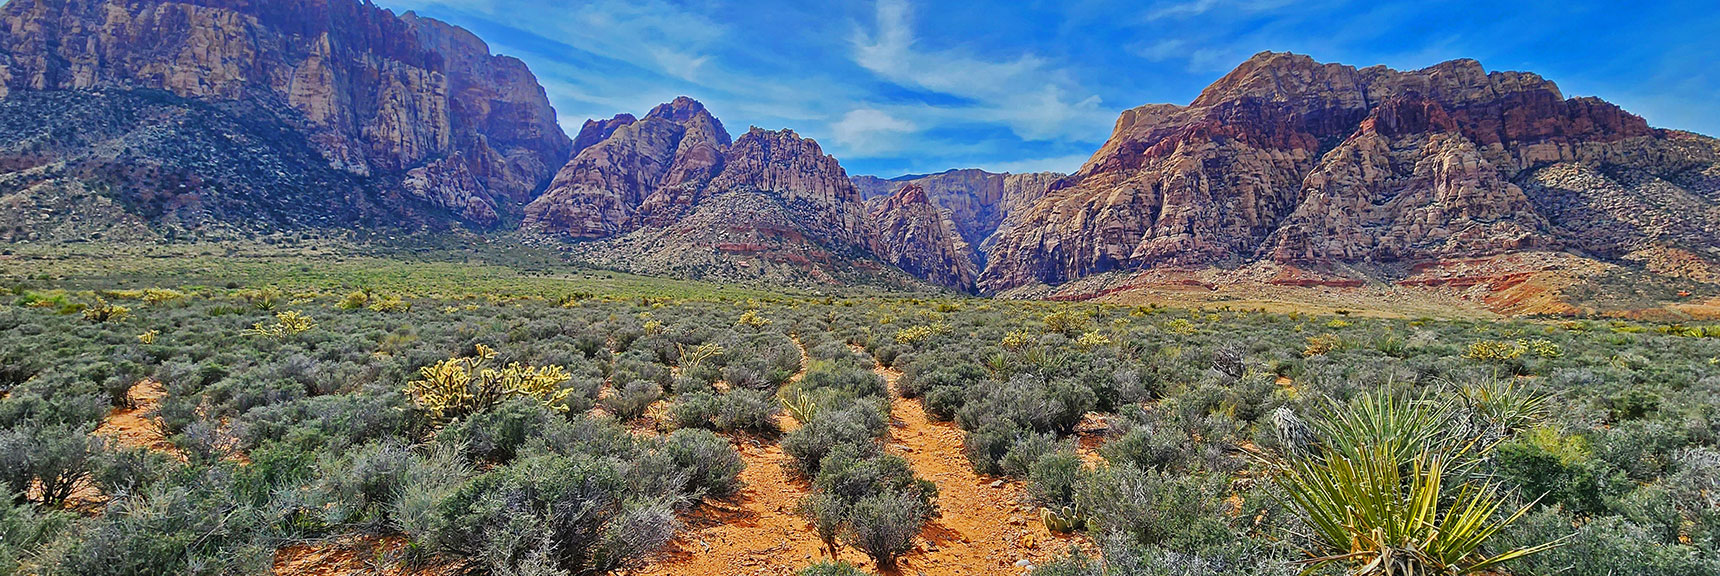 Old Road from Red Rock Canyon's Lower Scenic Drive To Pine Creek Canyon | Historic Roads in Red Rock Canyon, Nevada | David Smith | LasVegasAreaTrails.com